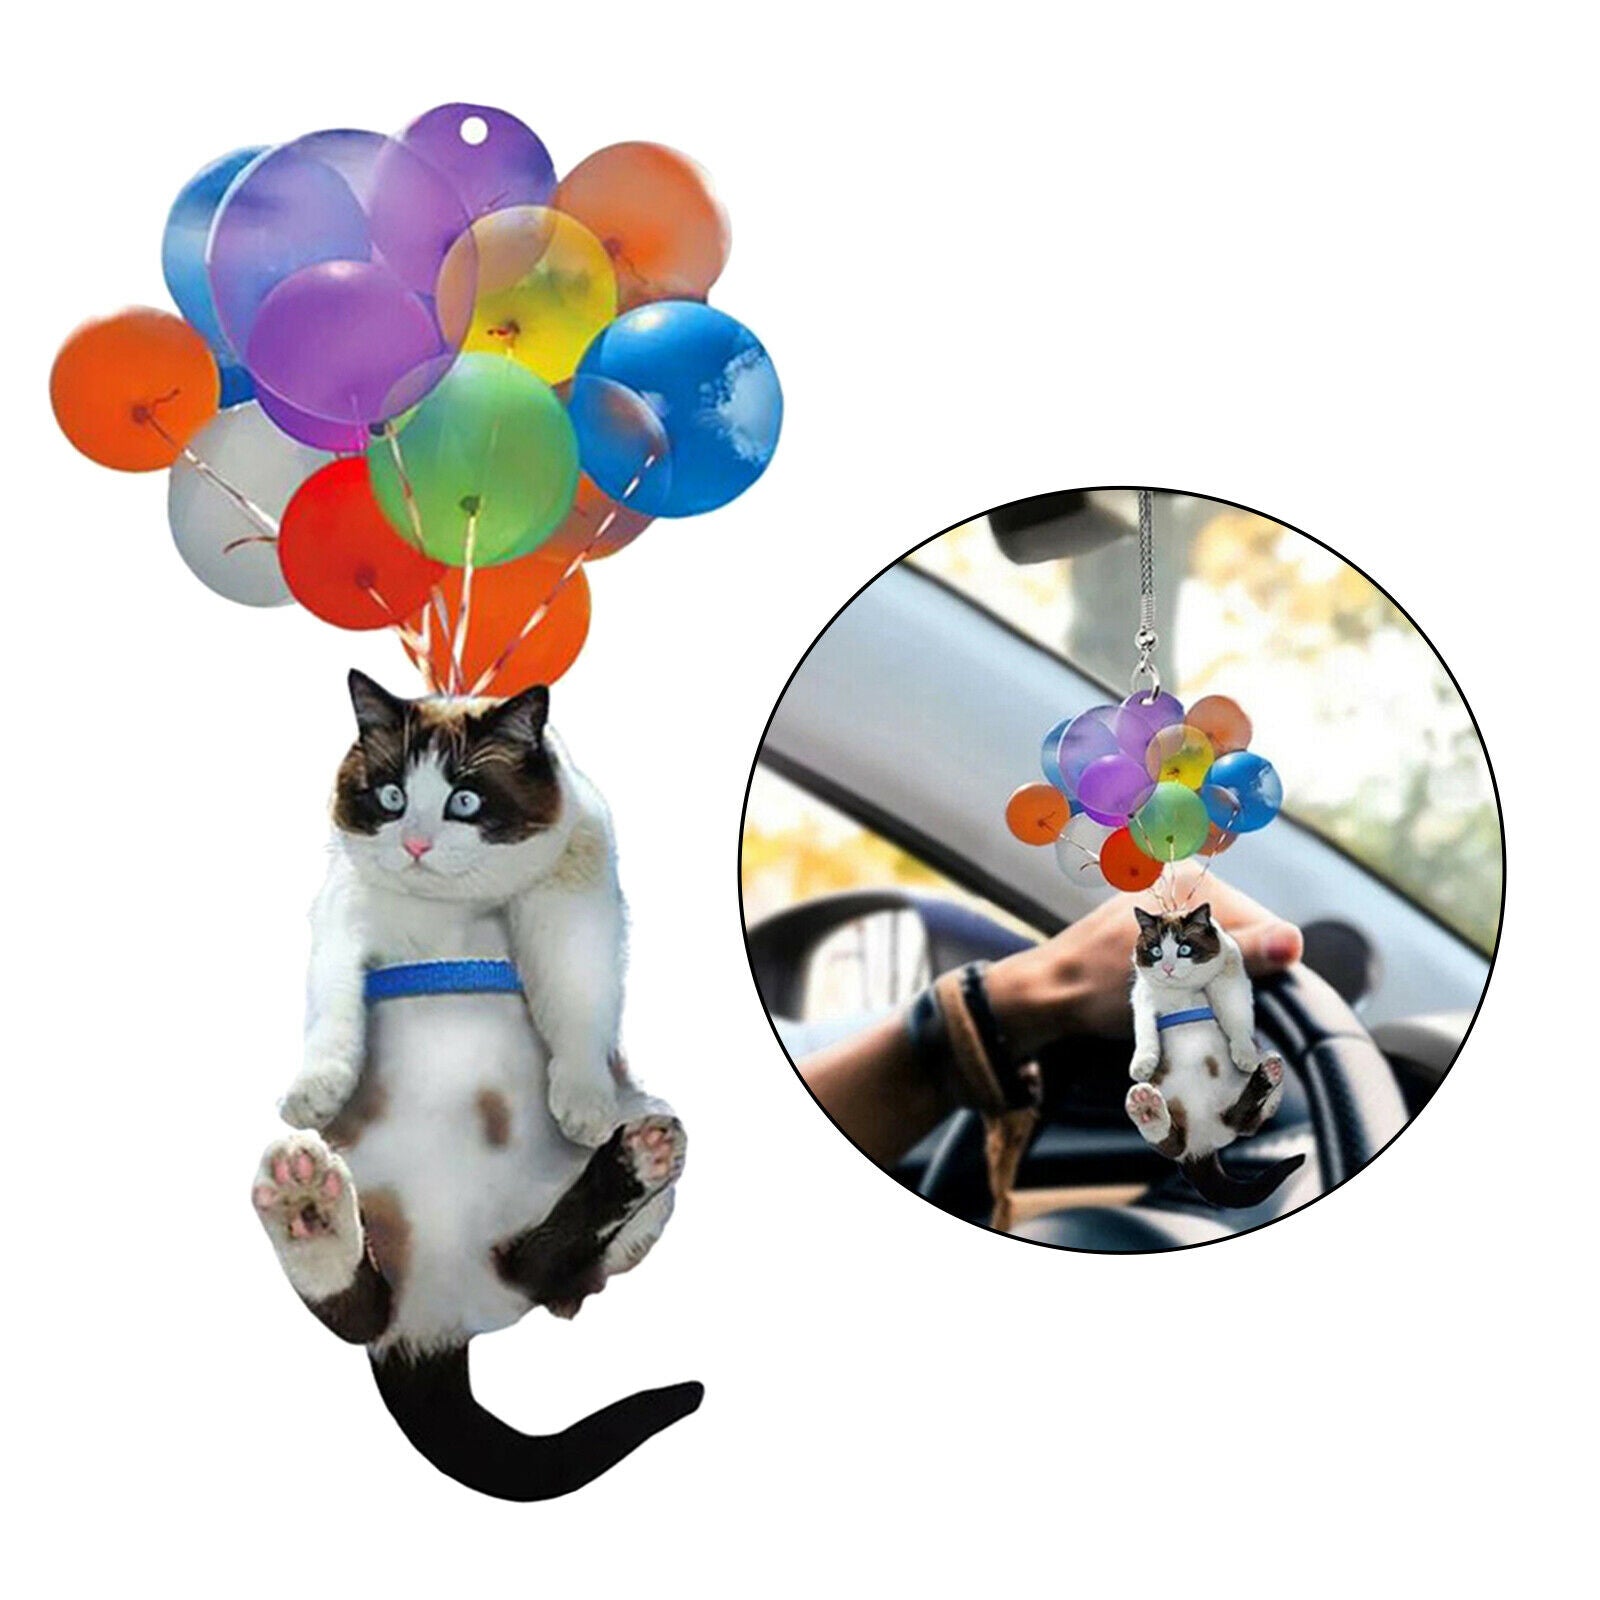 2pcs Creative Cute Car Charm Hanging Ornament Pendants with Colorful Balloons